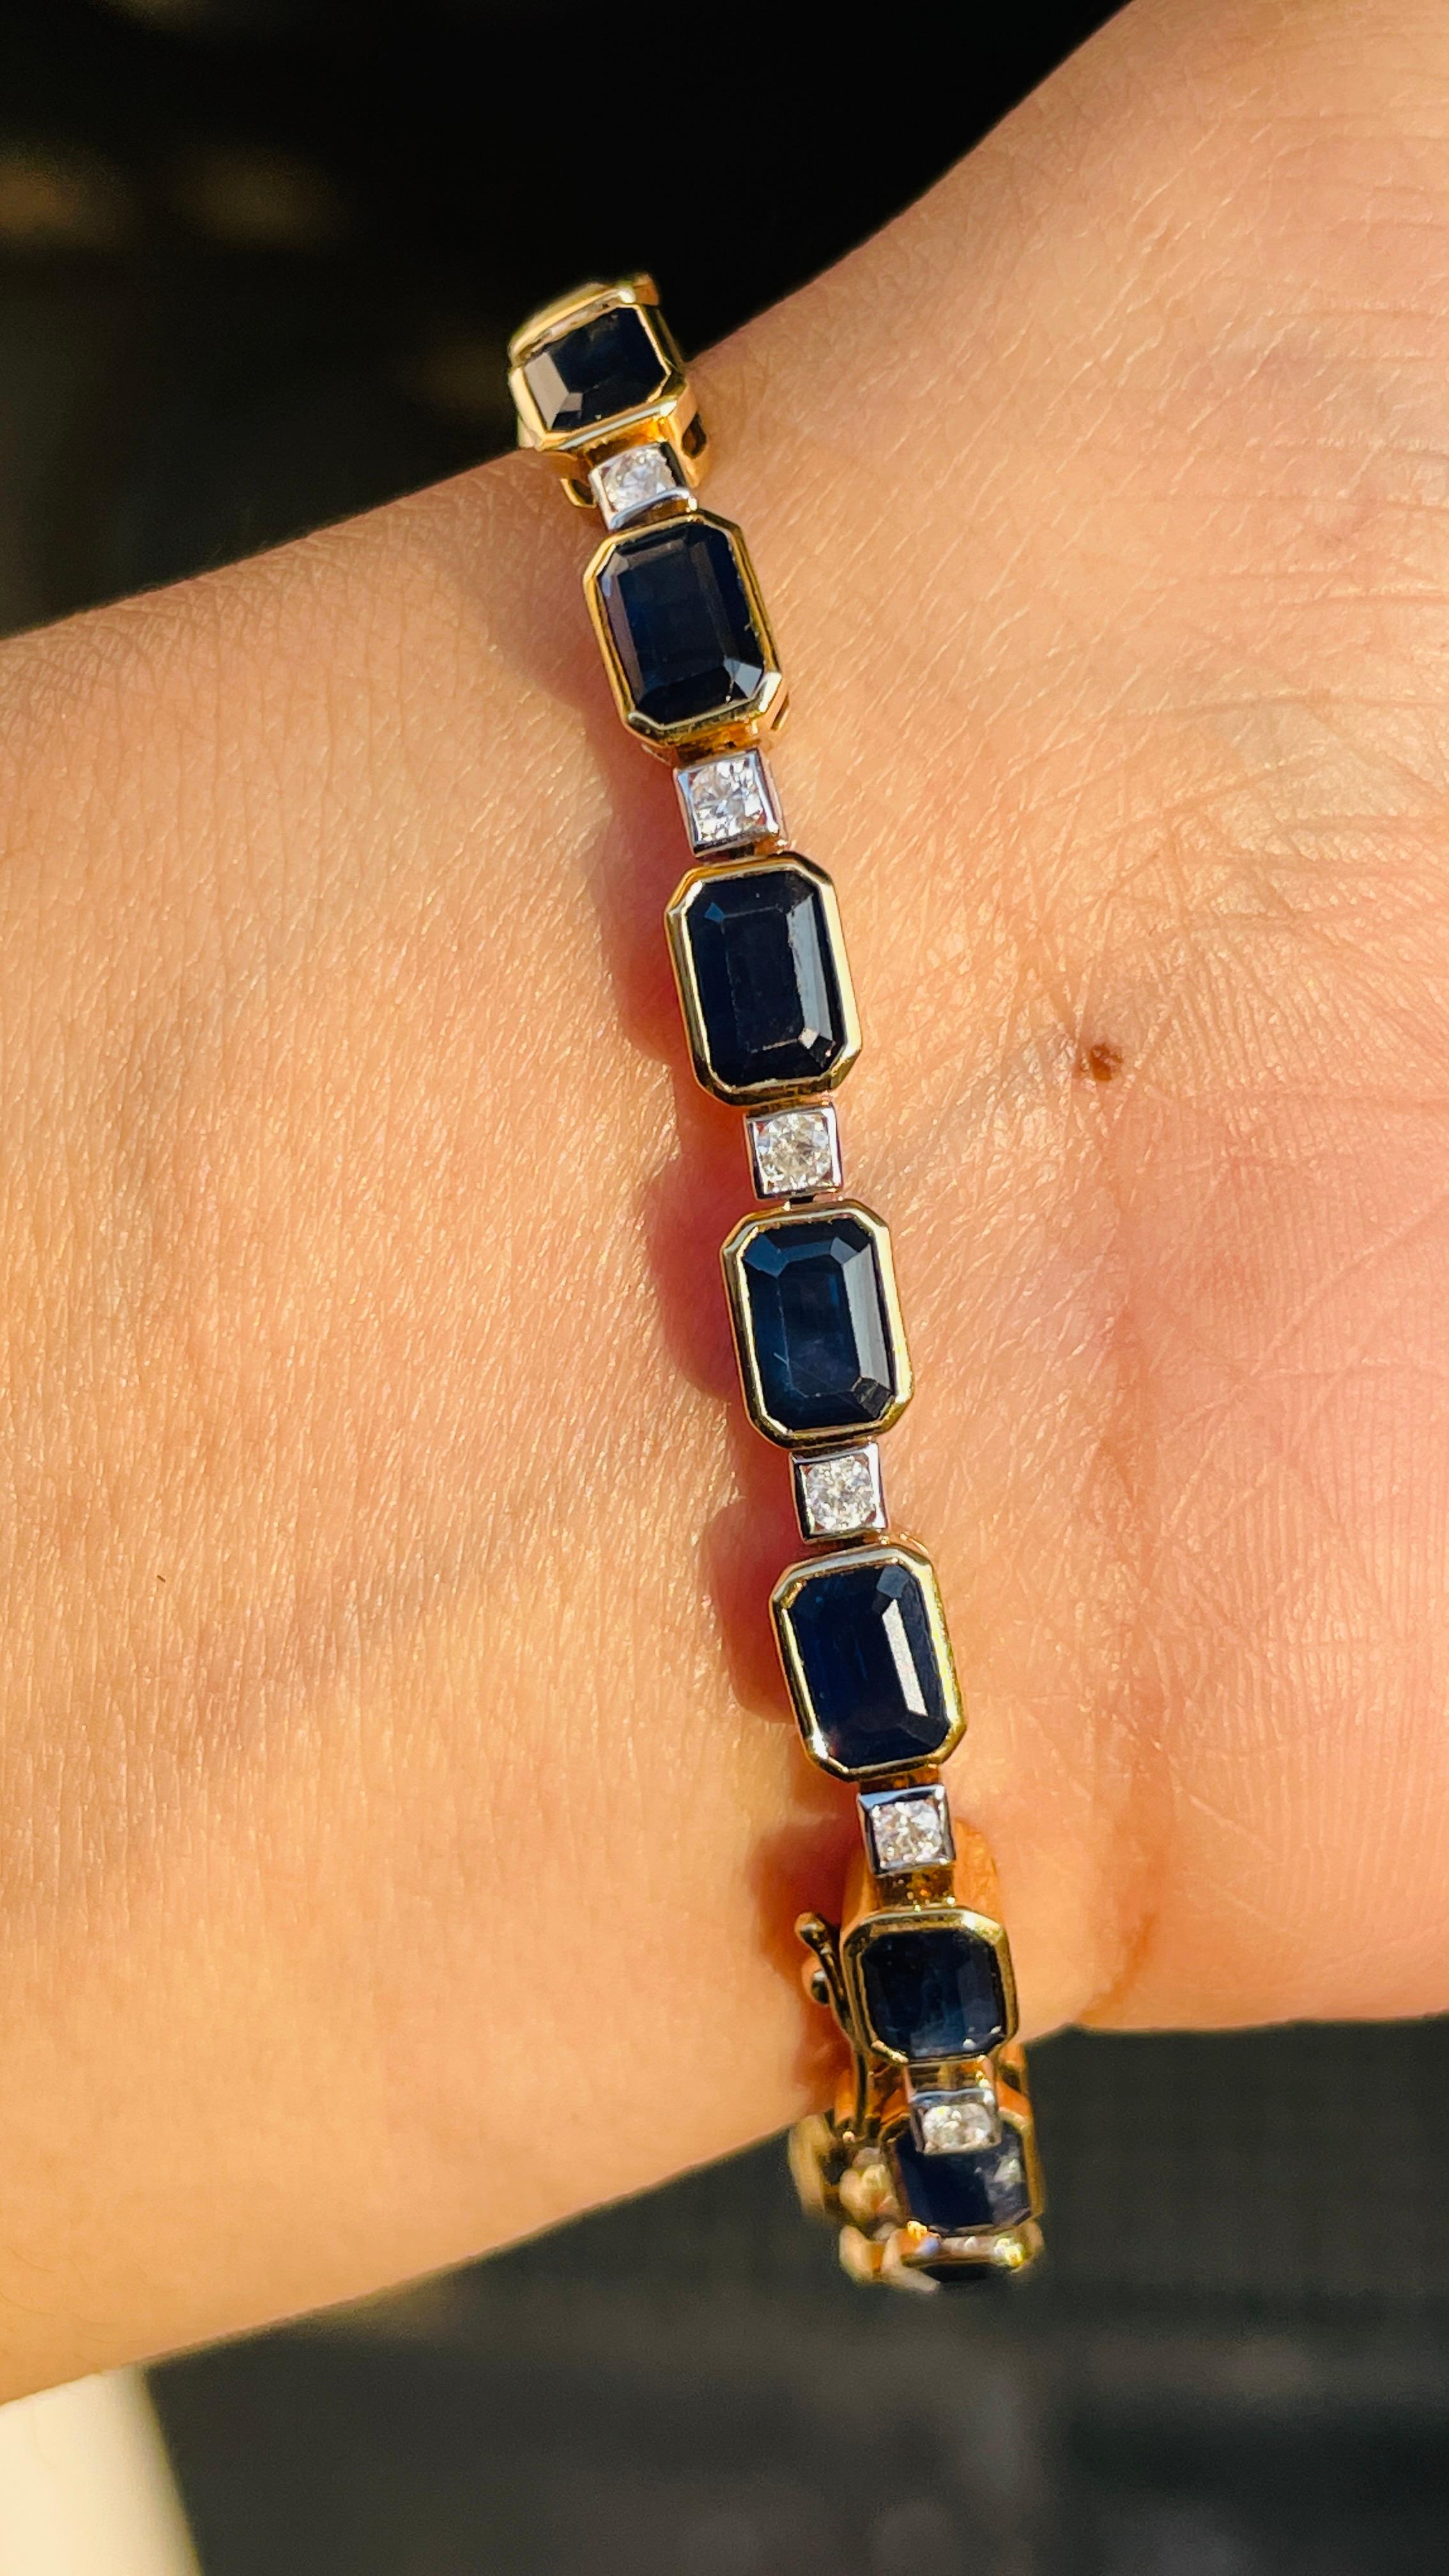 Blue sapphire and Diamond bracelet in 18K Gold. It has a perfect octagon cut gemstone to make you stand out on any occasion or an event.
A tennis bracelet is an essential piece of jewelry when it comes to your wedding day. The sleek and elegant